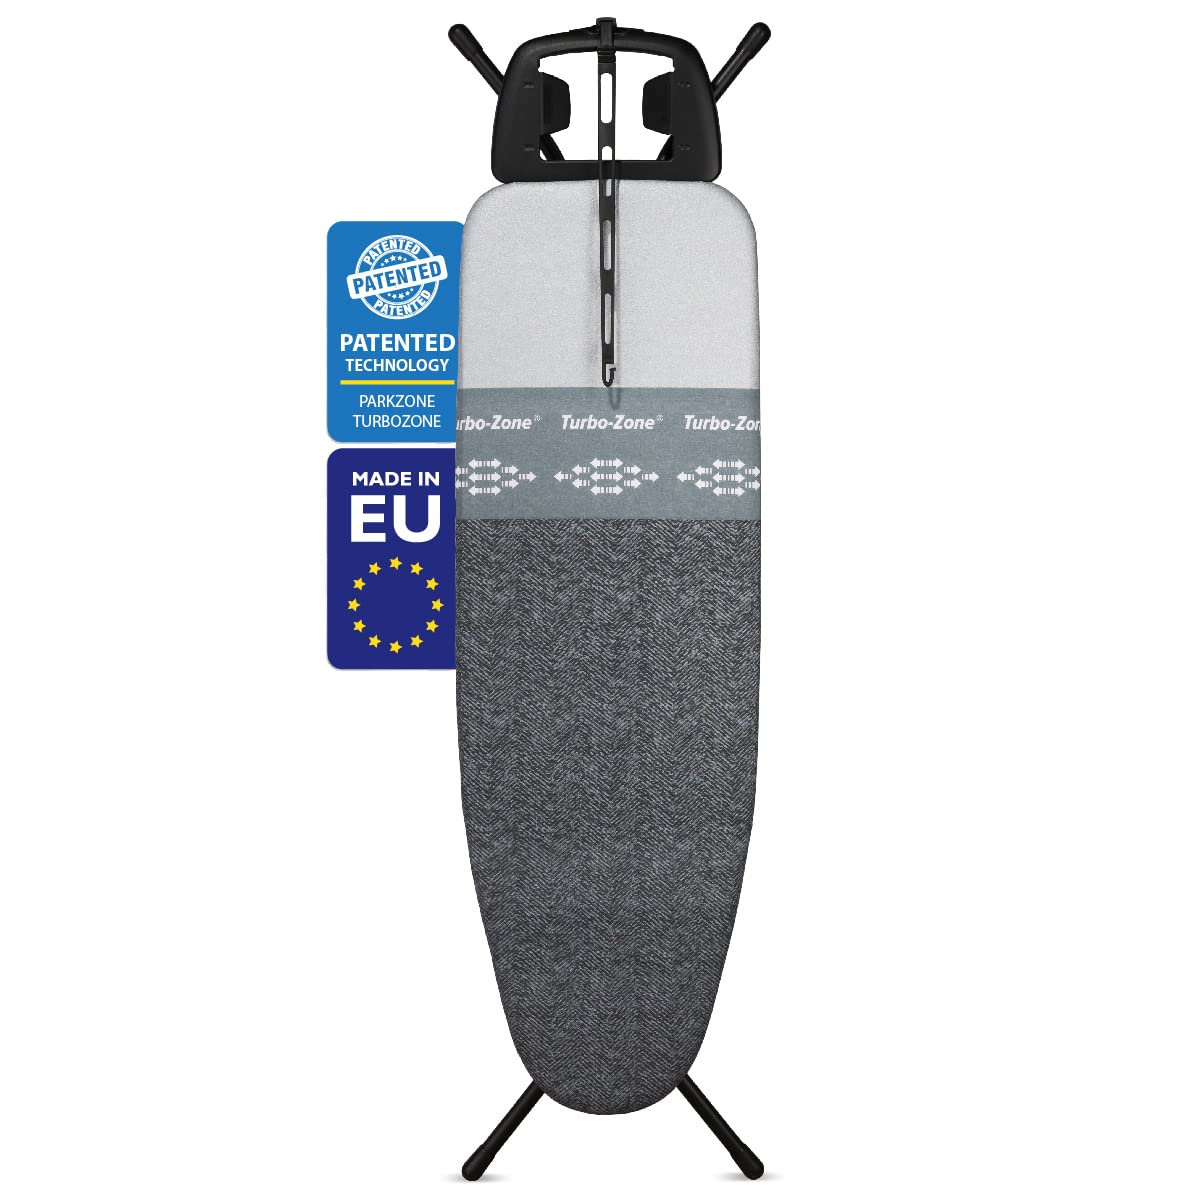 Bartnelli Heavy Duty Ironing Board 48x15 | Designed & Made in Europe with Patent Technology, Turbo & Park Zone, Features: 4 Layer Cover &Pad,Height-Adjustable,4 Premium Steel Legs,Upgraded Iron Rest.  - Very Good